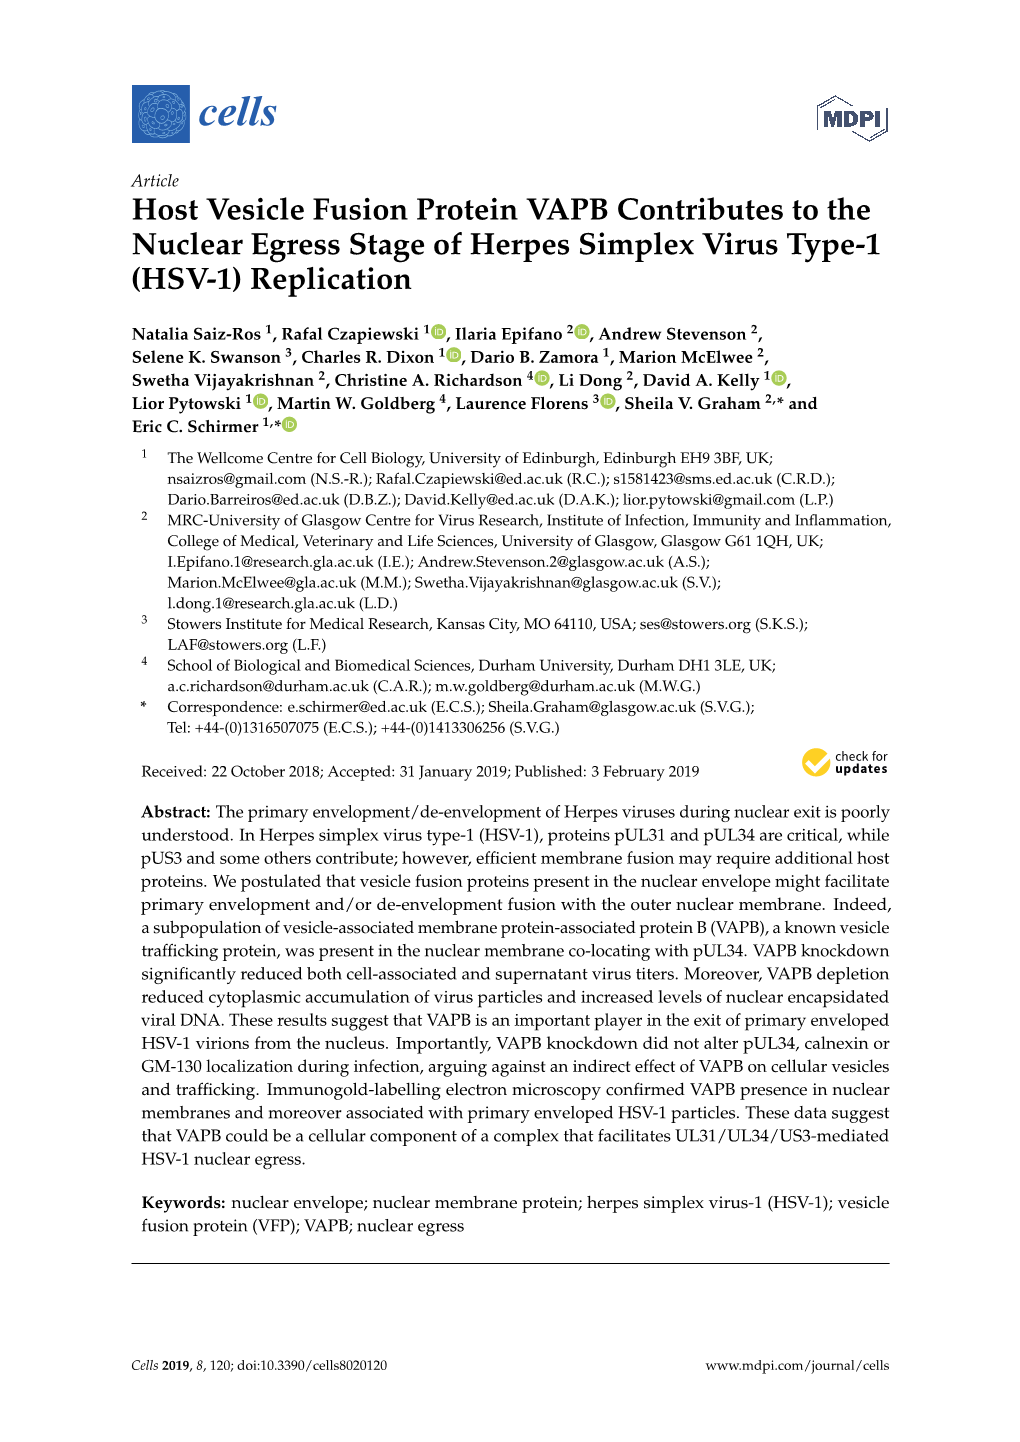 Host Vesicle Fusion Protein VAPB Contributes to the Nuclear Egress Stage of Herpes Simplex Virus Type-1 (HSV-1) Replication